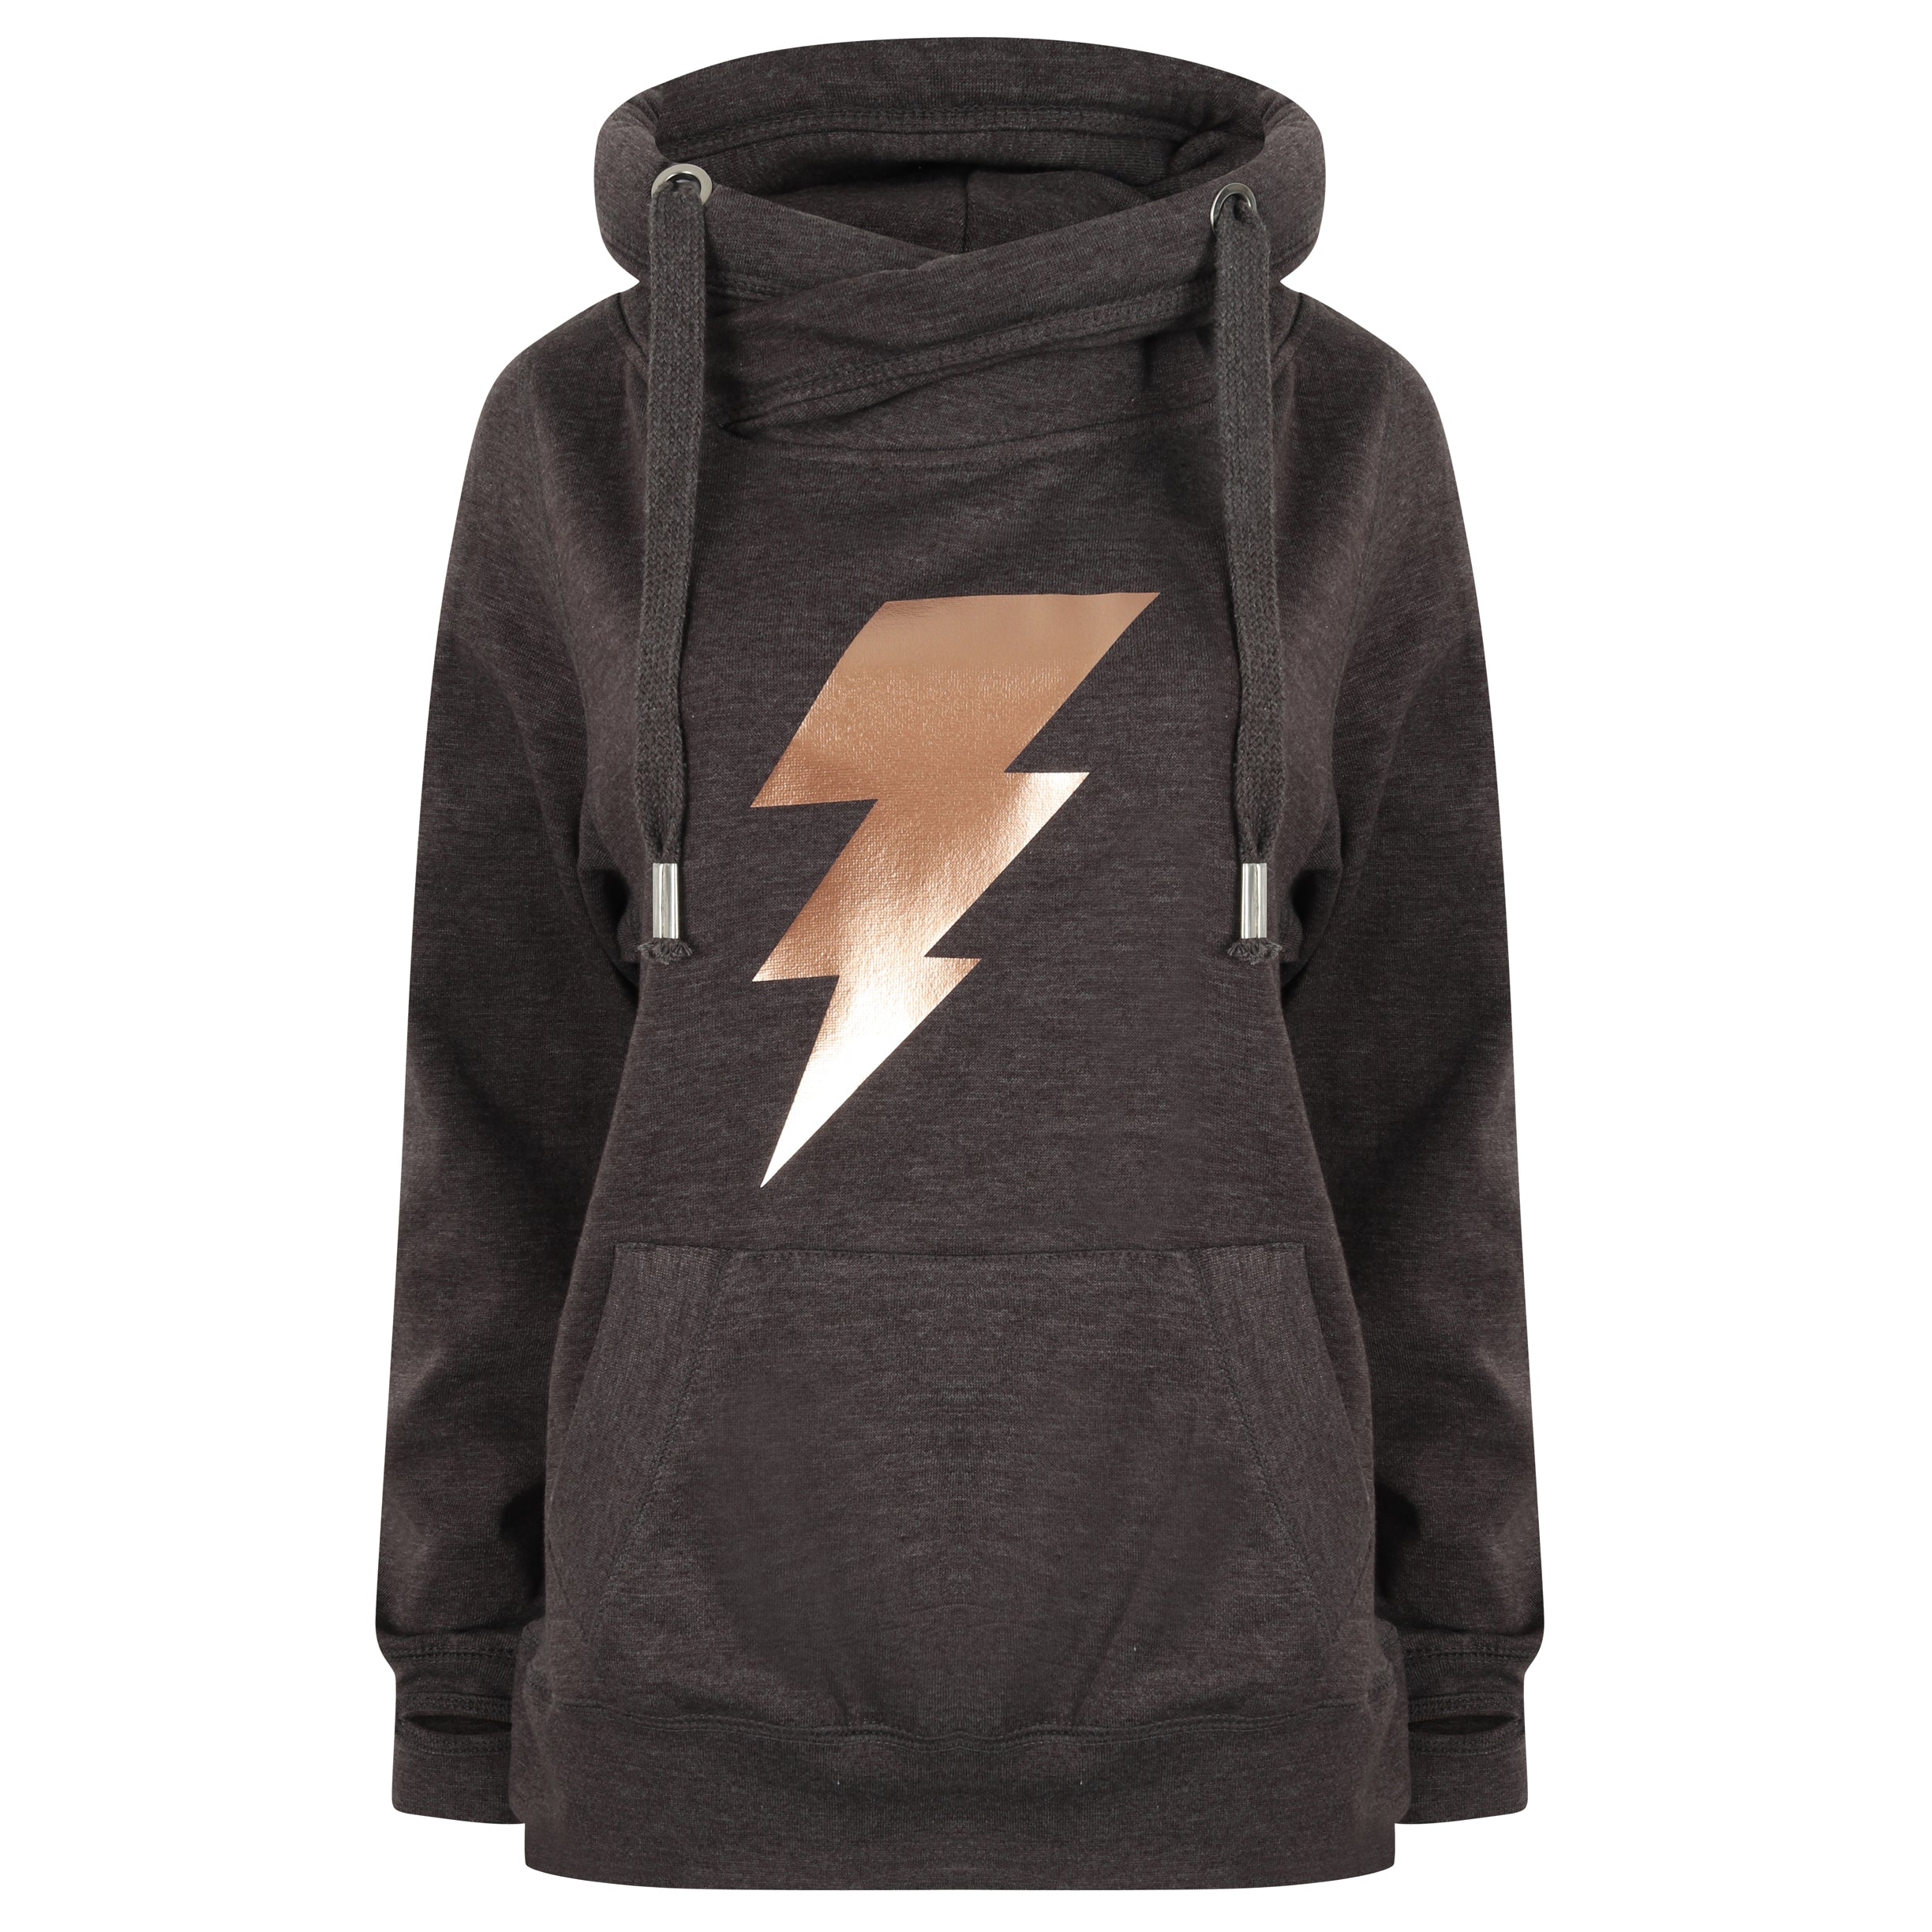 Charcoal Luxe Hoodie with Metallic Lightning Bolt Size 8 - 10